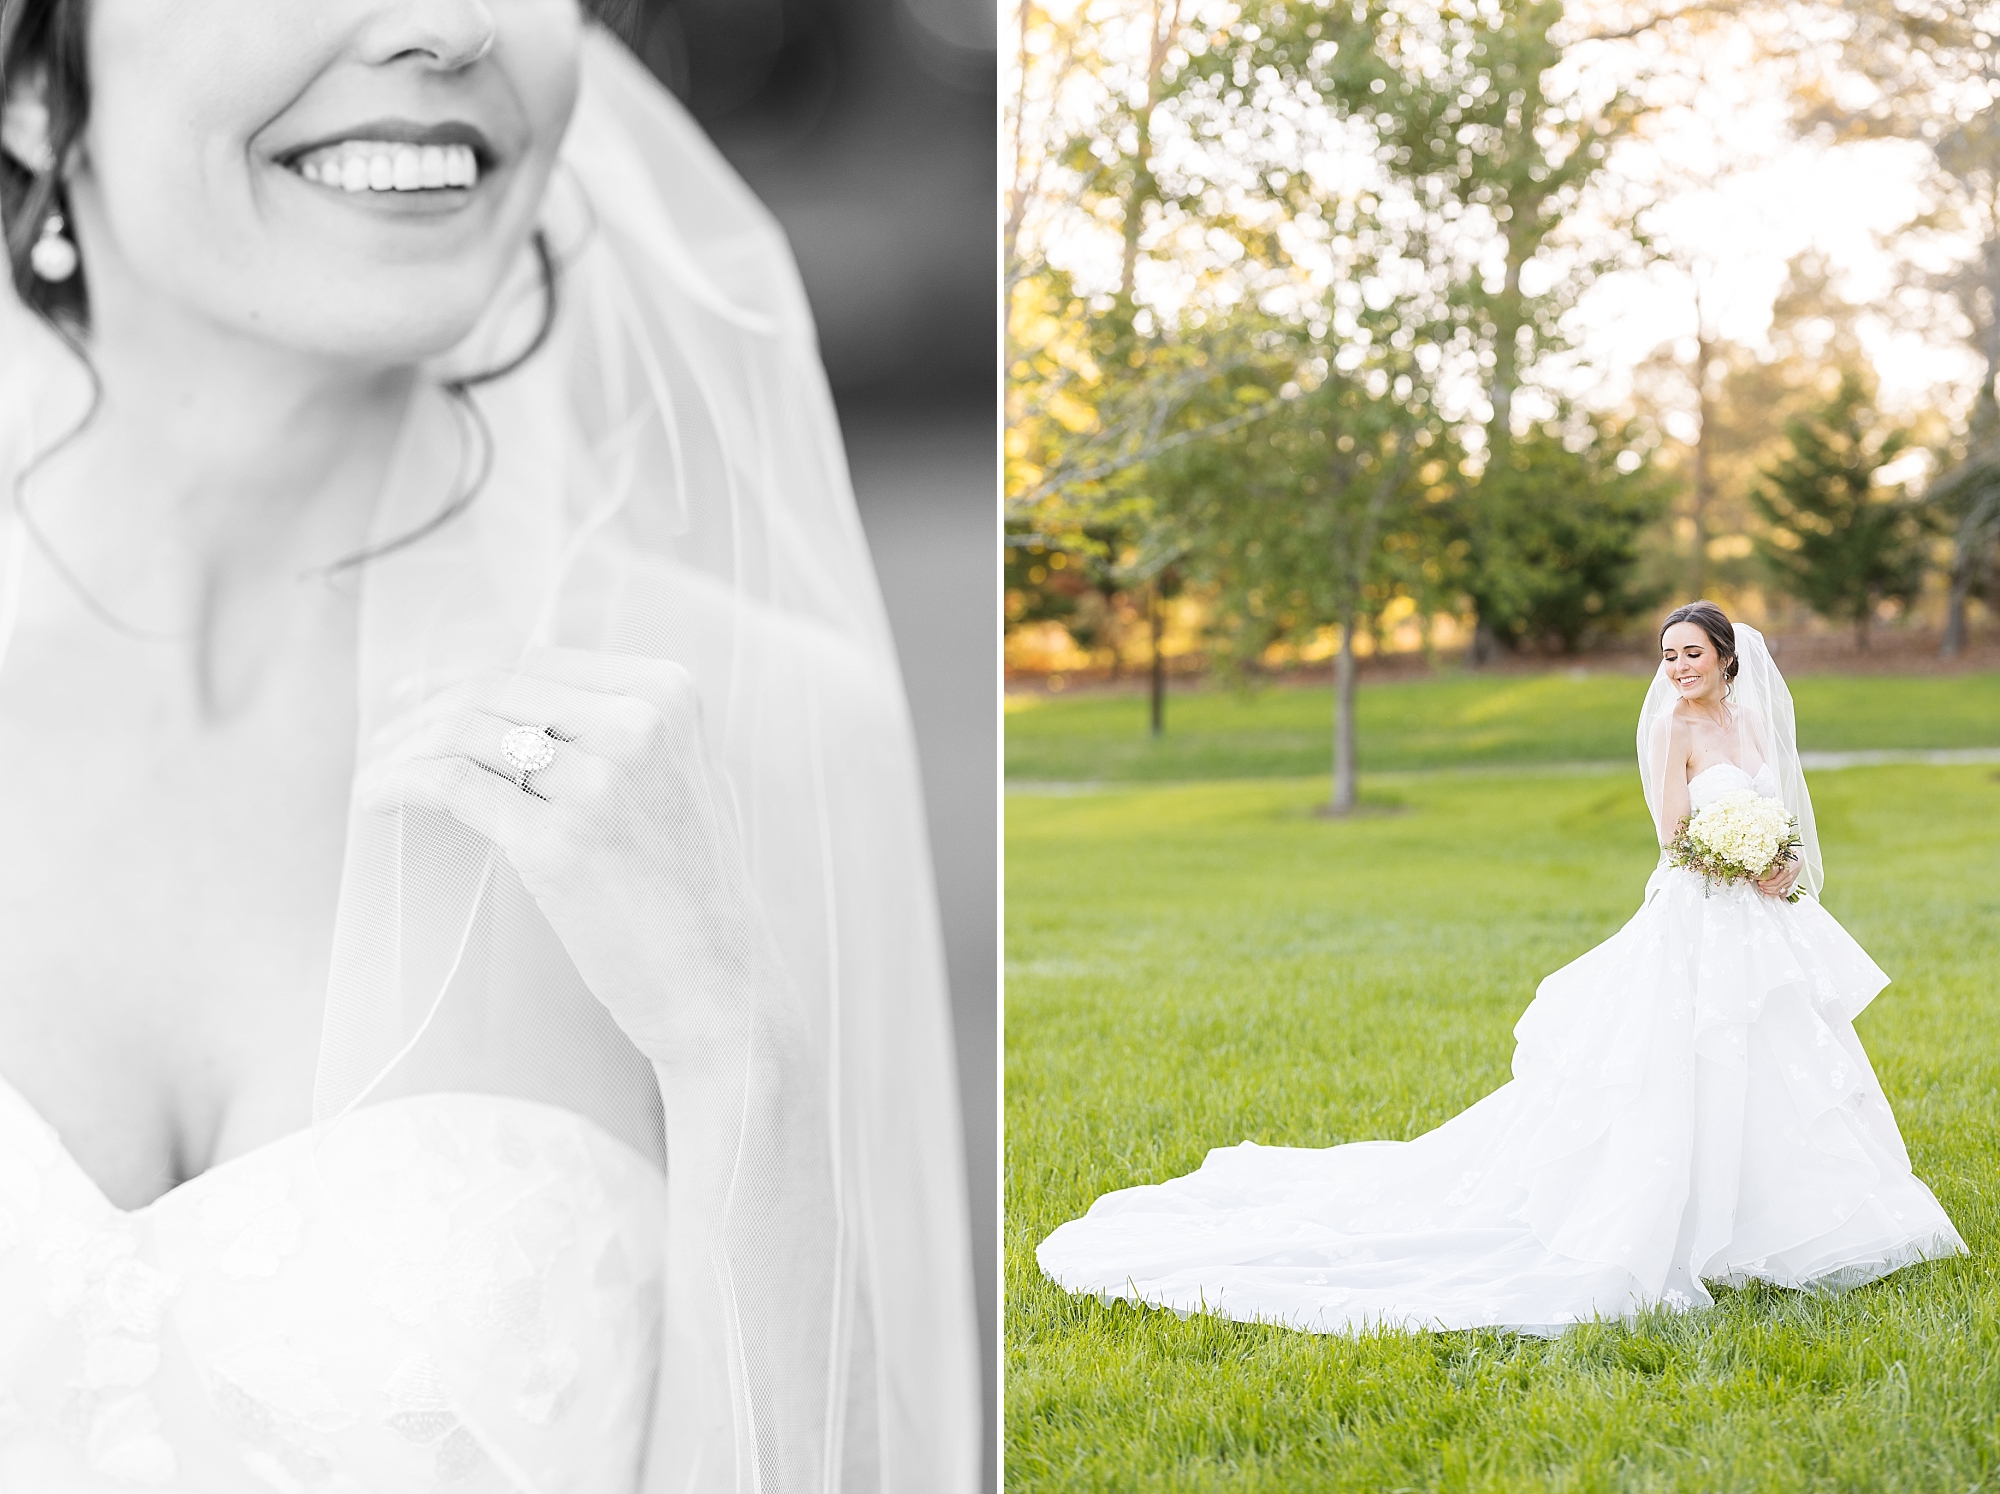 Bridal portraits by a pond in an elegant ballgown at Southern Grace Farms in Angier | Raleigh Wedding Photographer